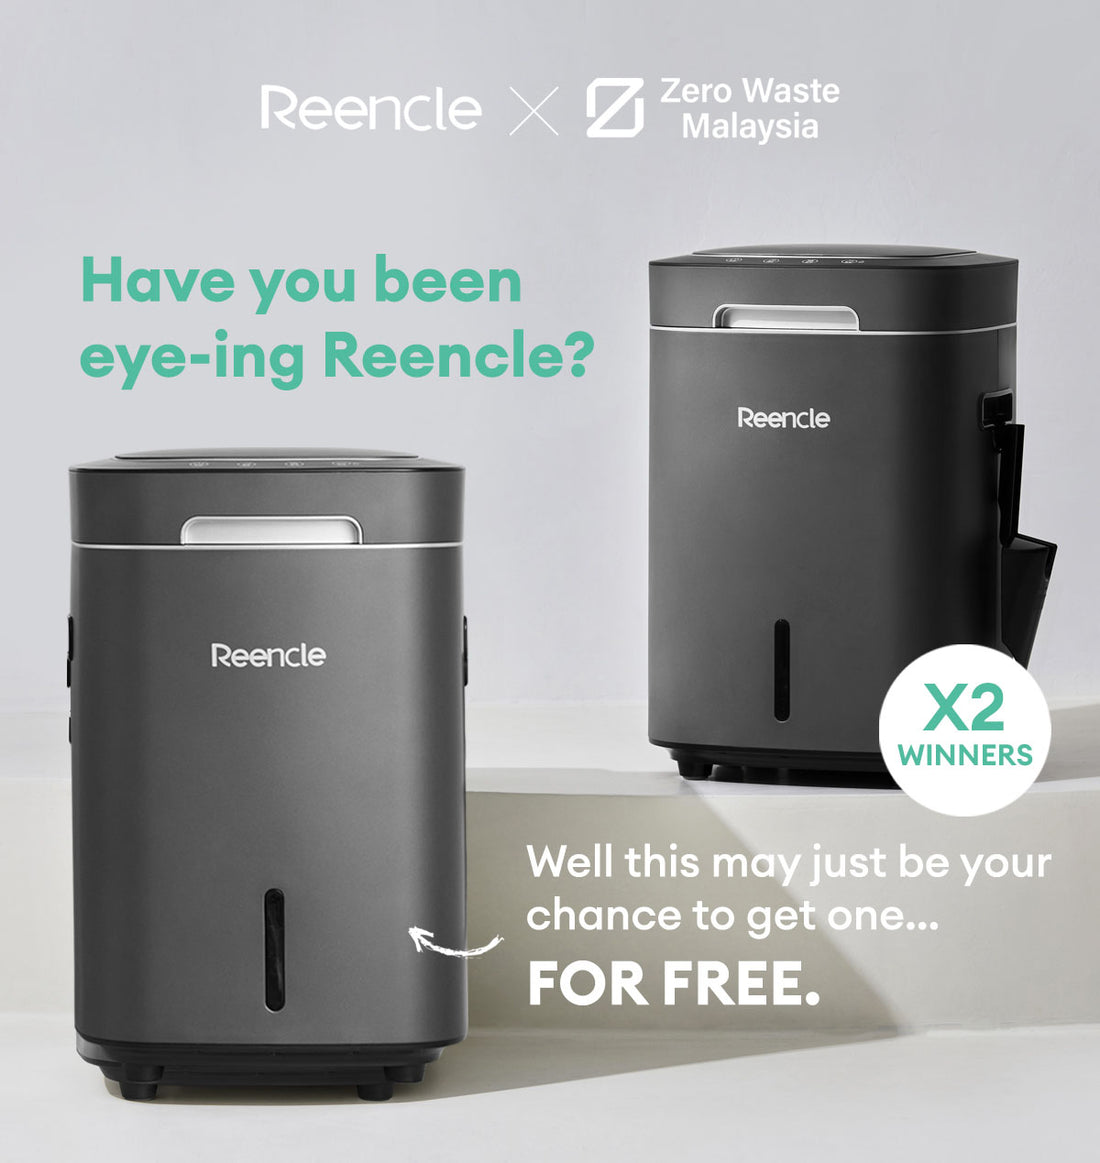 How You Can Get A FREE Reencle